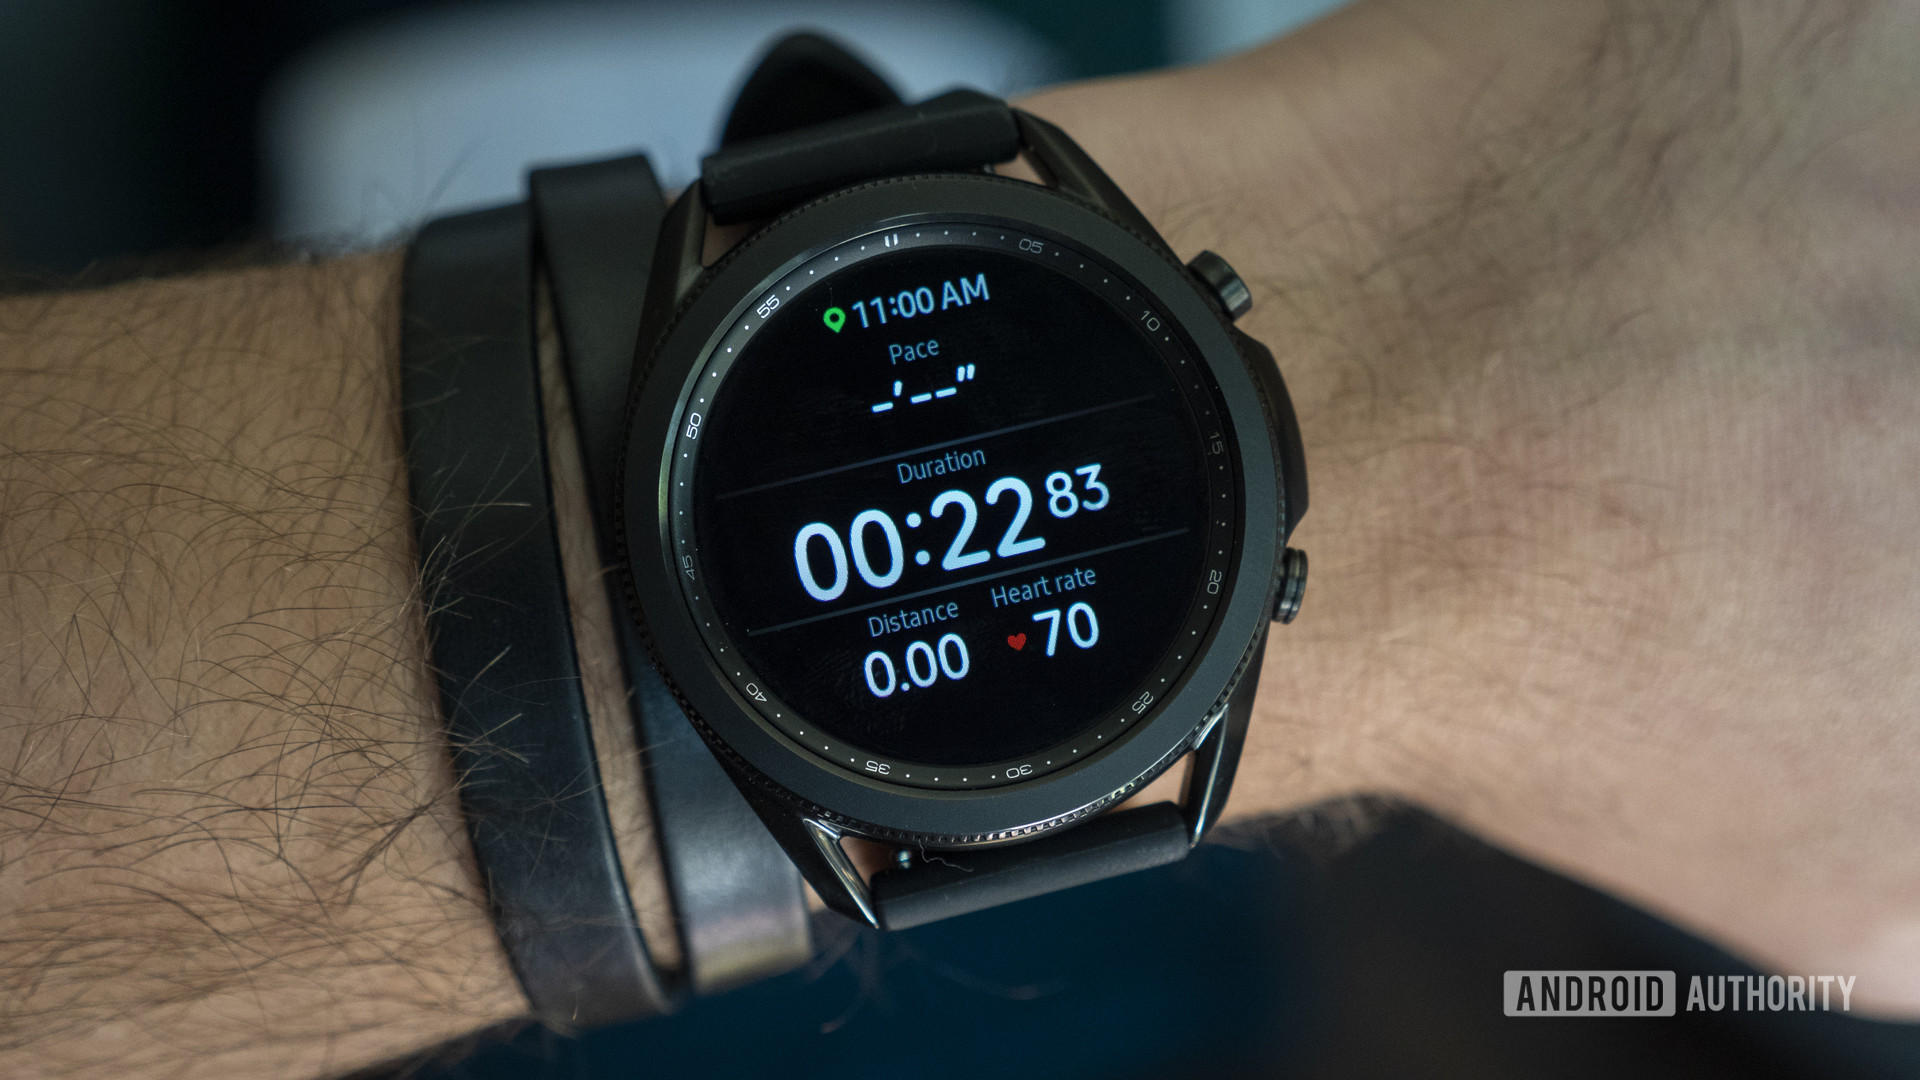 A Samsung Galaxy Watch 3 displays a user's running workout stats including pace, duration, and heart rate.